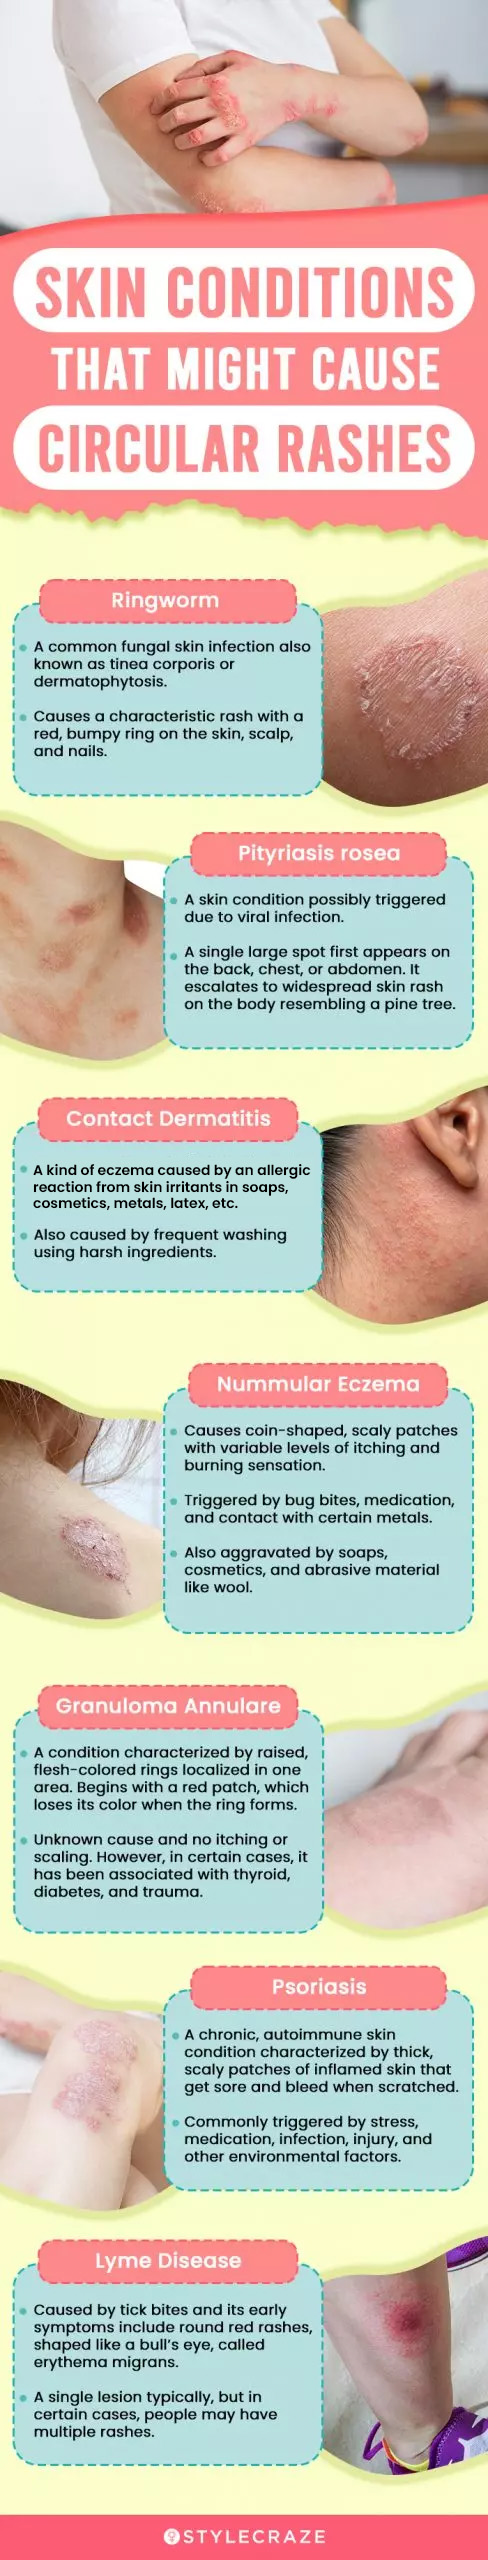 skin conditions that might cause circular rashes (infographic)